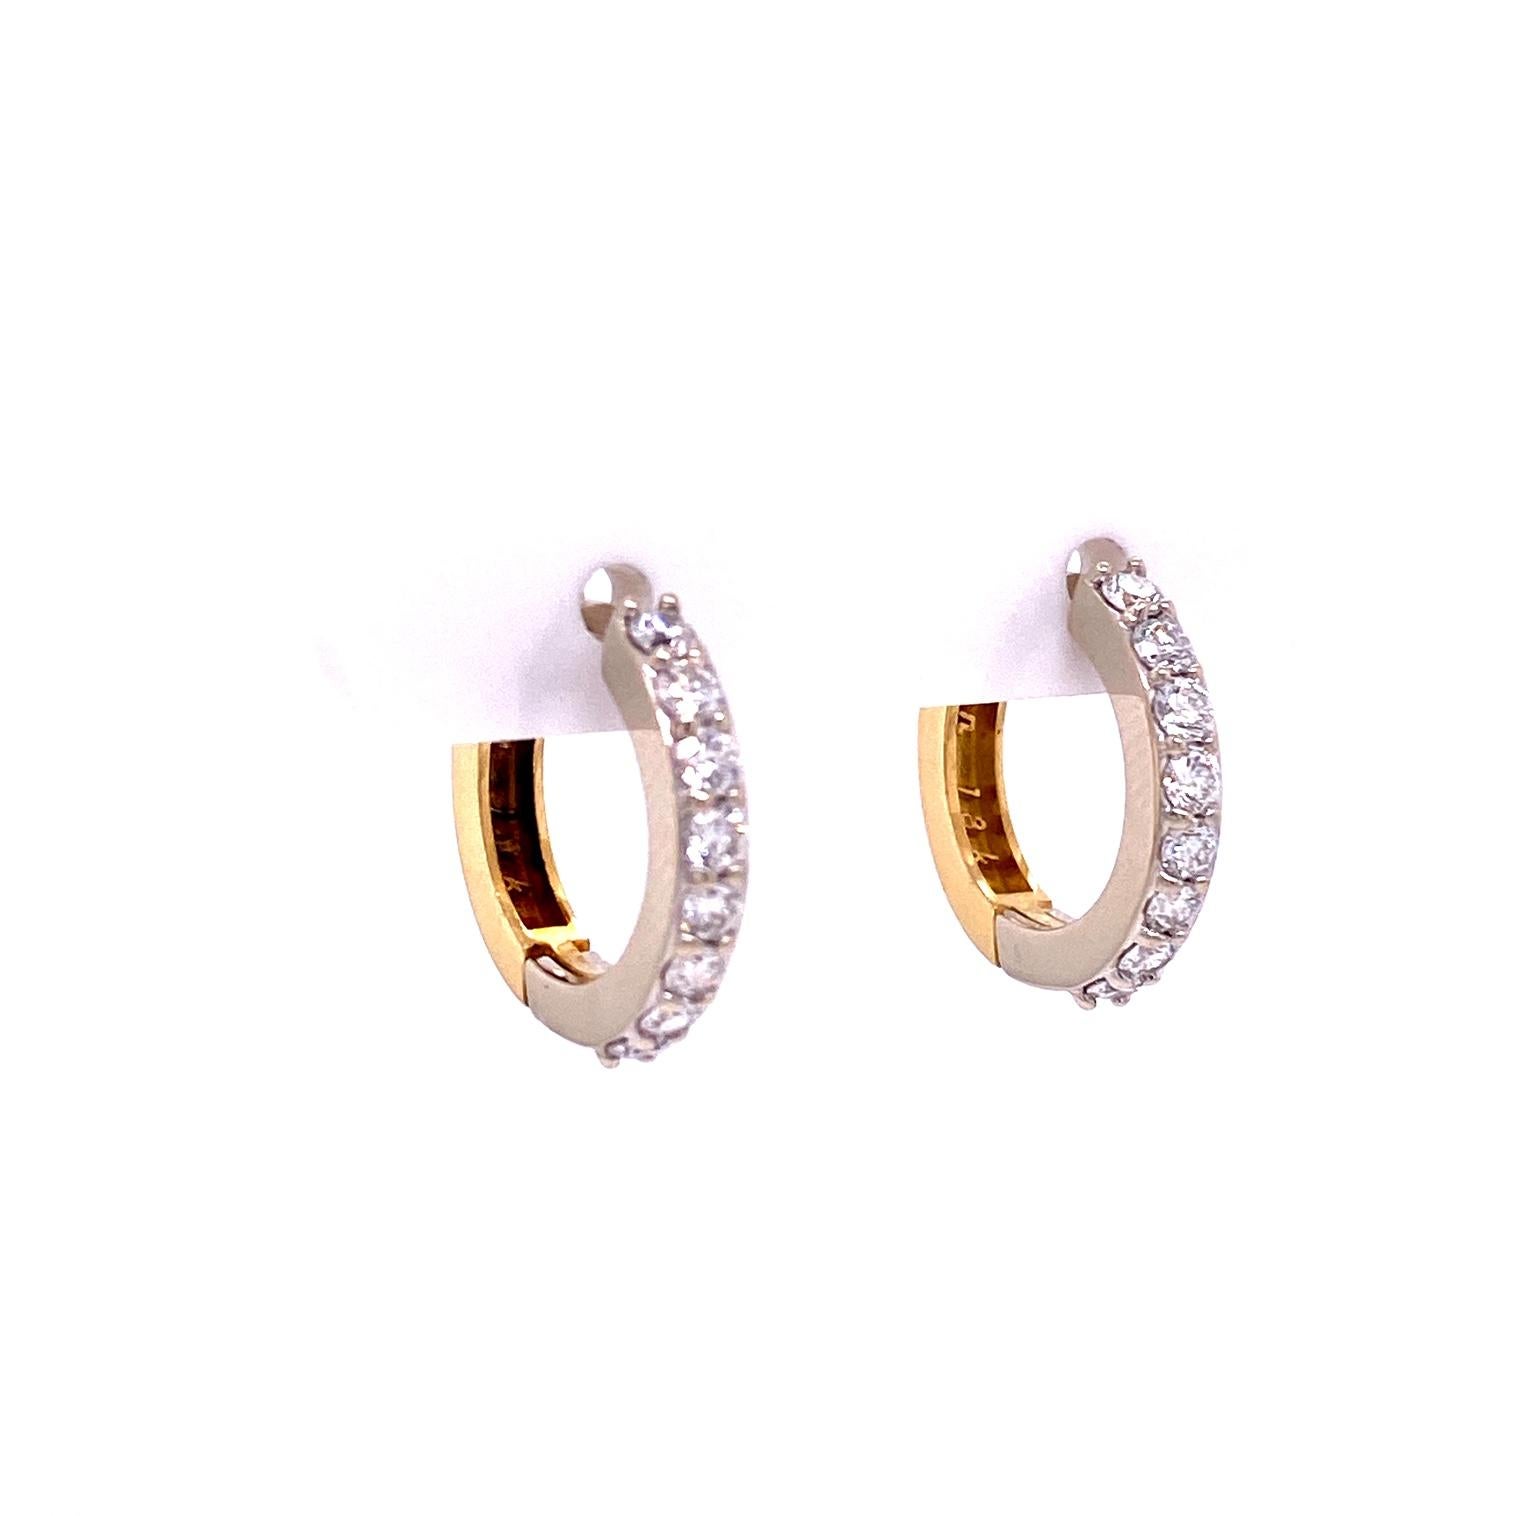 Contemporary 18 Karat Gold Diamond Hoops with Silver Sapphire and Diamond Earring Jackets